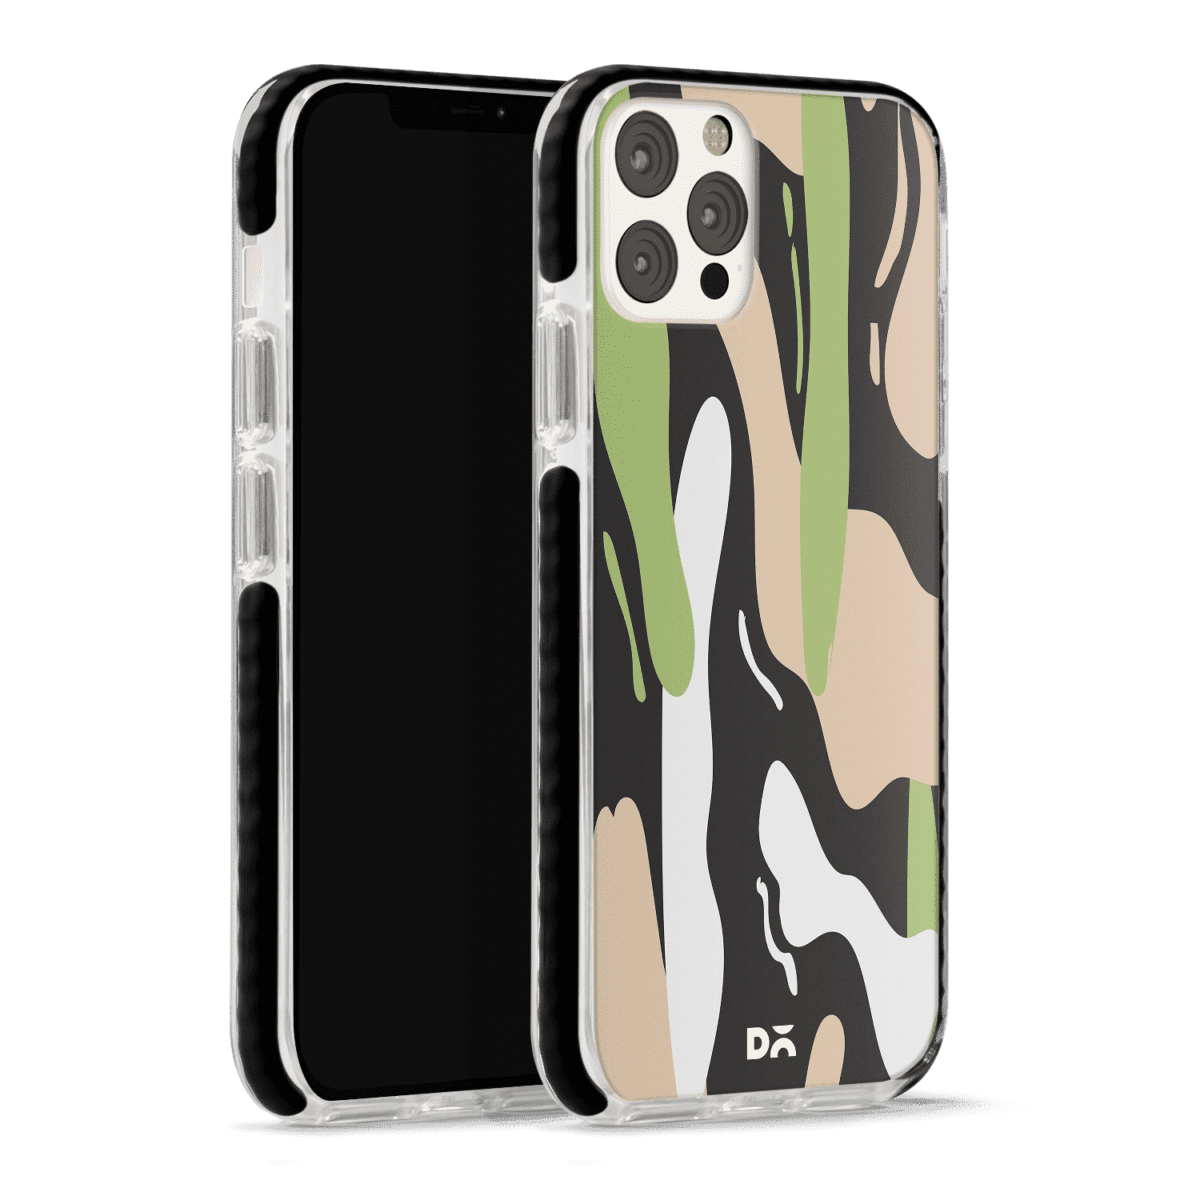 Pastel Camo Stride Case Cover for Apple iPhone 12 Pro and Apple iPhone 12 Pro Max with great design and shock proof | Klippik | Online Shopping | Kuwait UAE Saudi